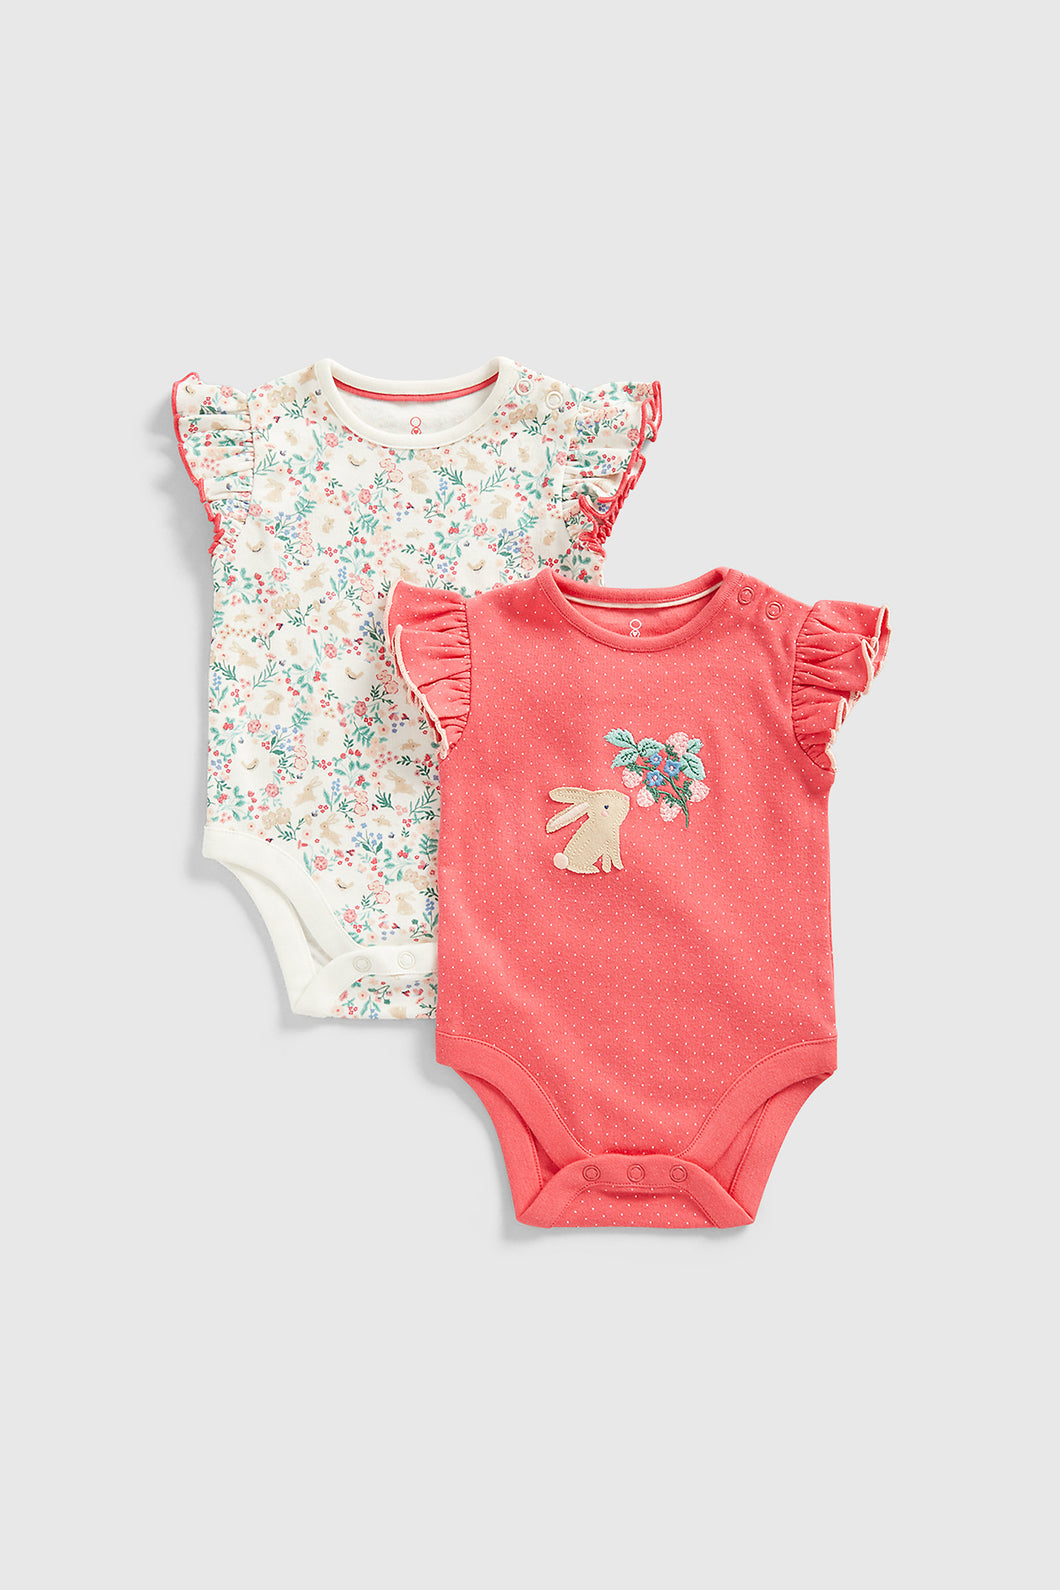 Mothercare Floral Bunny Bodysuits - 2 Pack